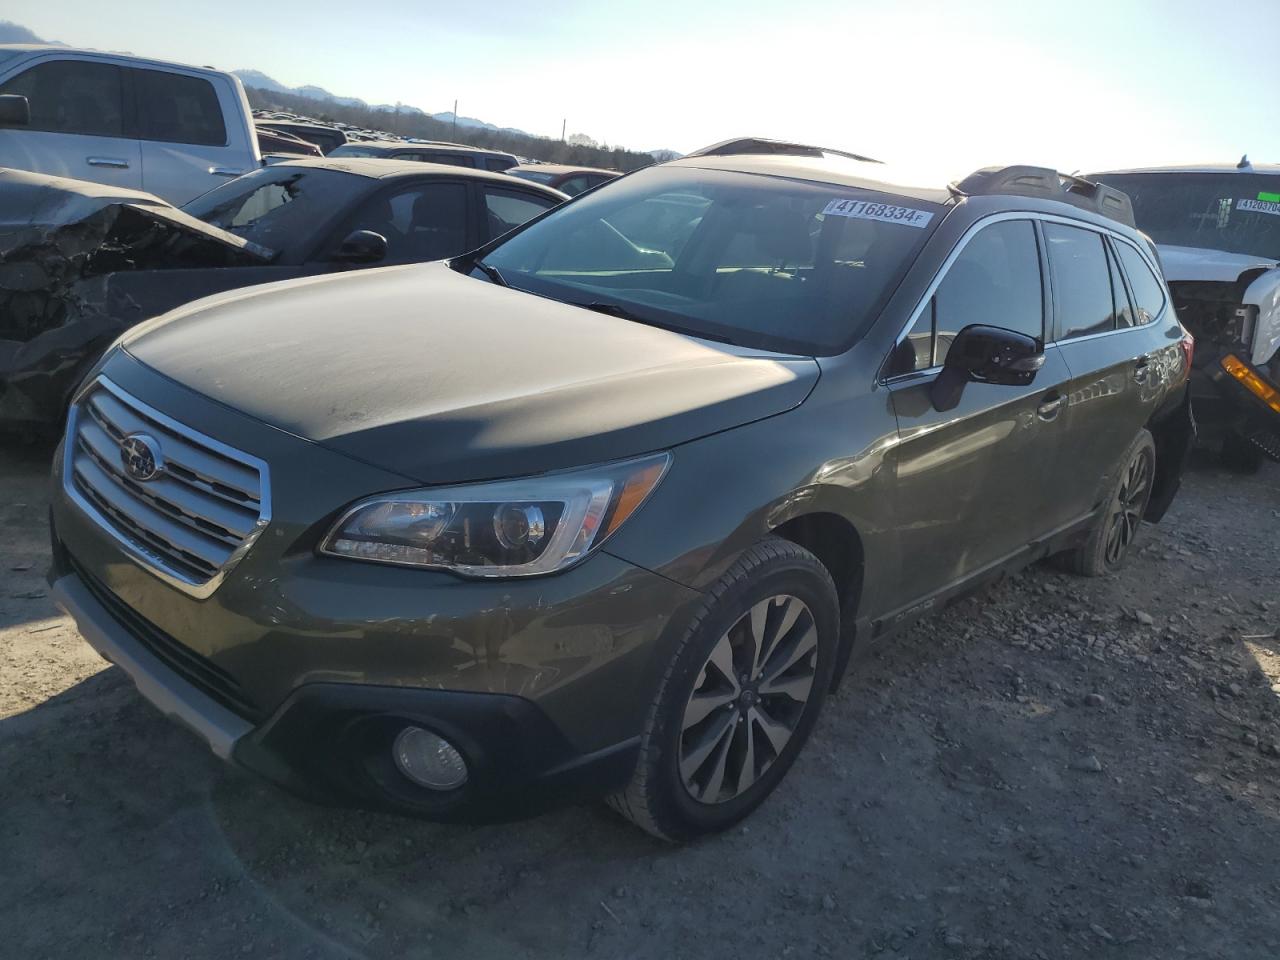 vin: 4S4BSBNC9F3274365 4S4BSBNC9F3274365 2015 subaru outback 2500 for Sale in 37354 6763, Tn - Knoxville, Madisonville, USA